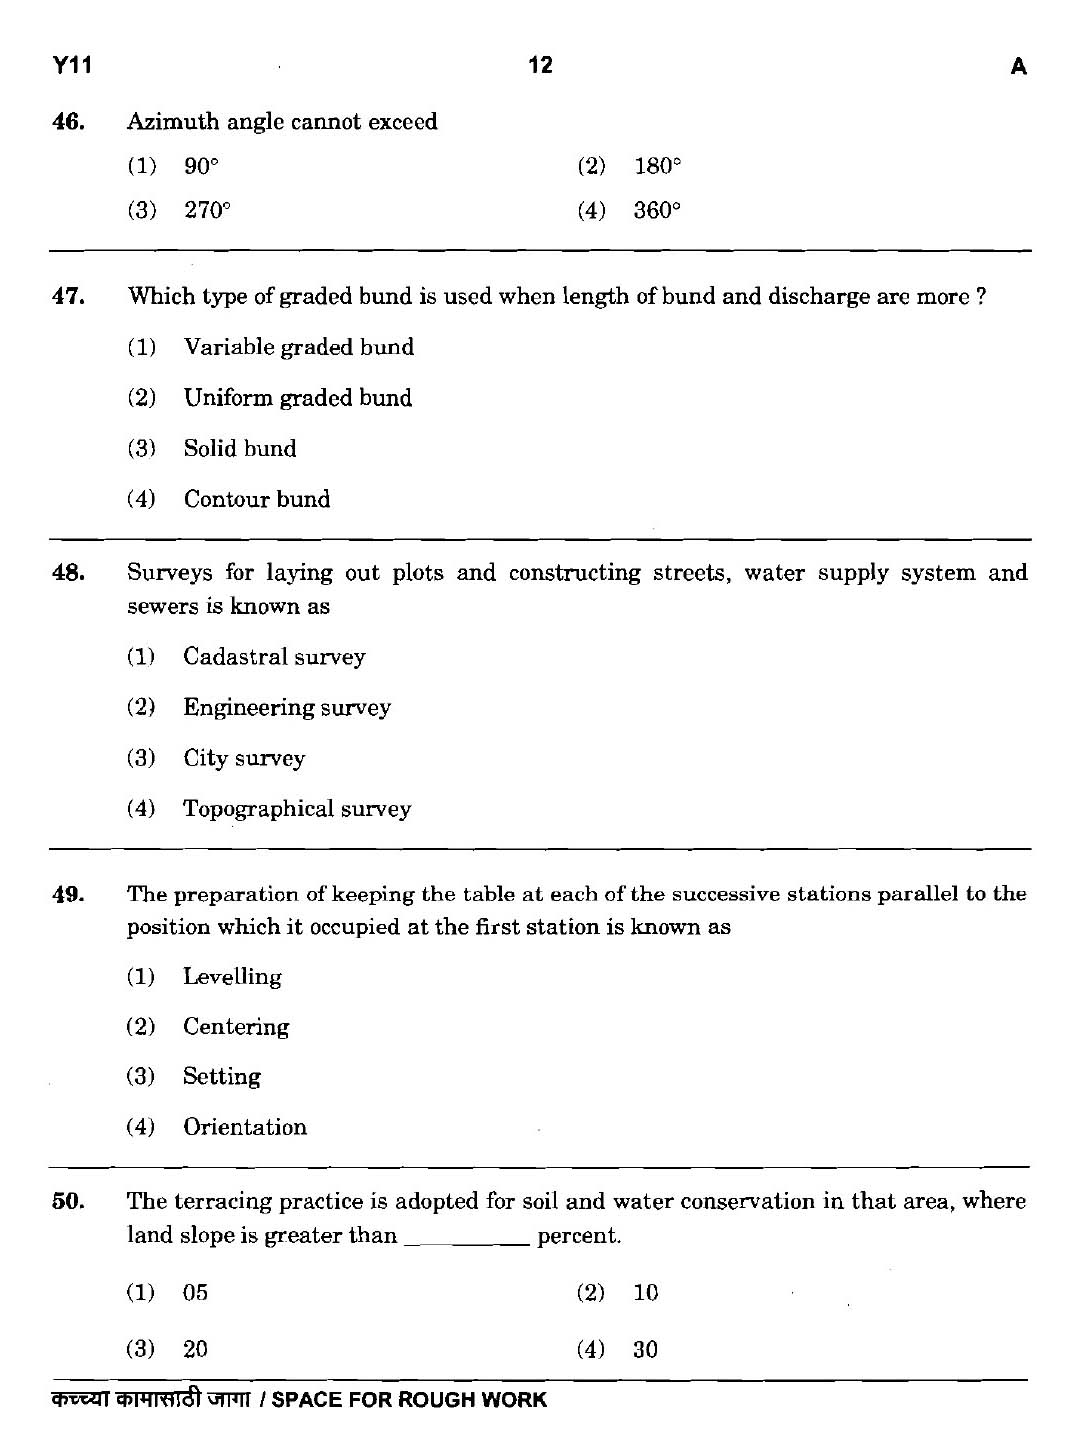 MPSC Agricultural Services Main Exam 2018 Question Paper 1 Agricultural Science 11